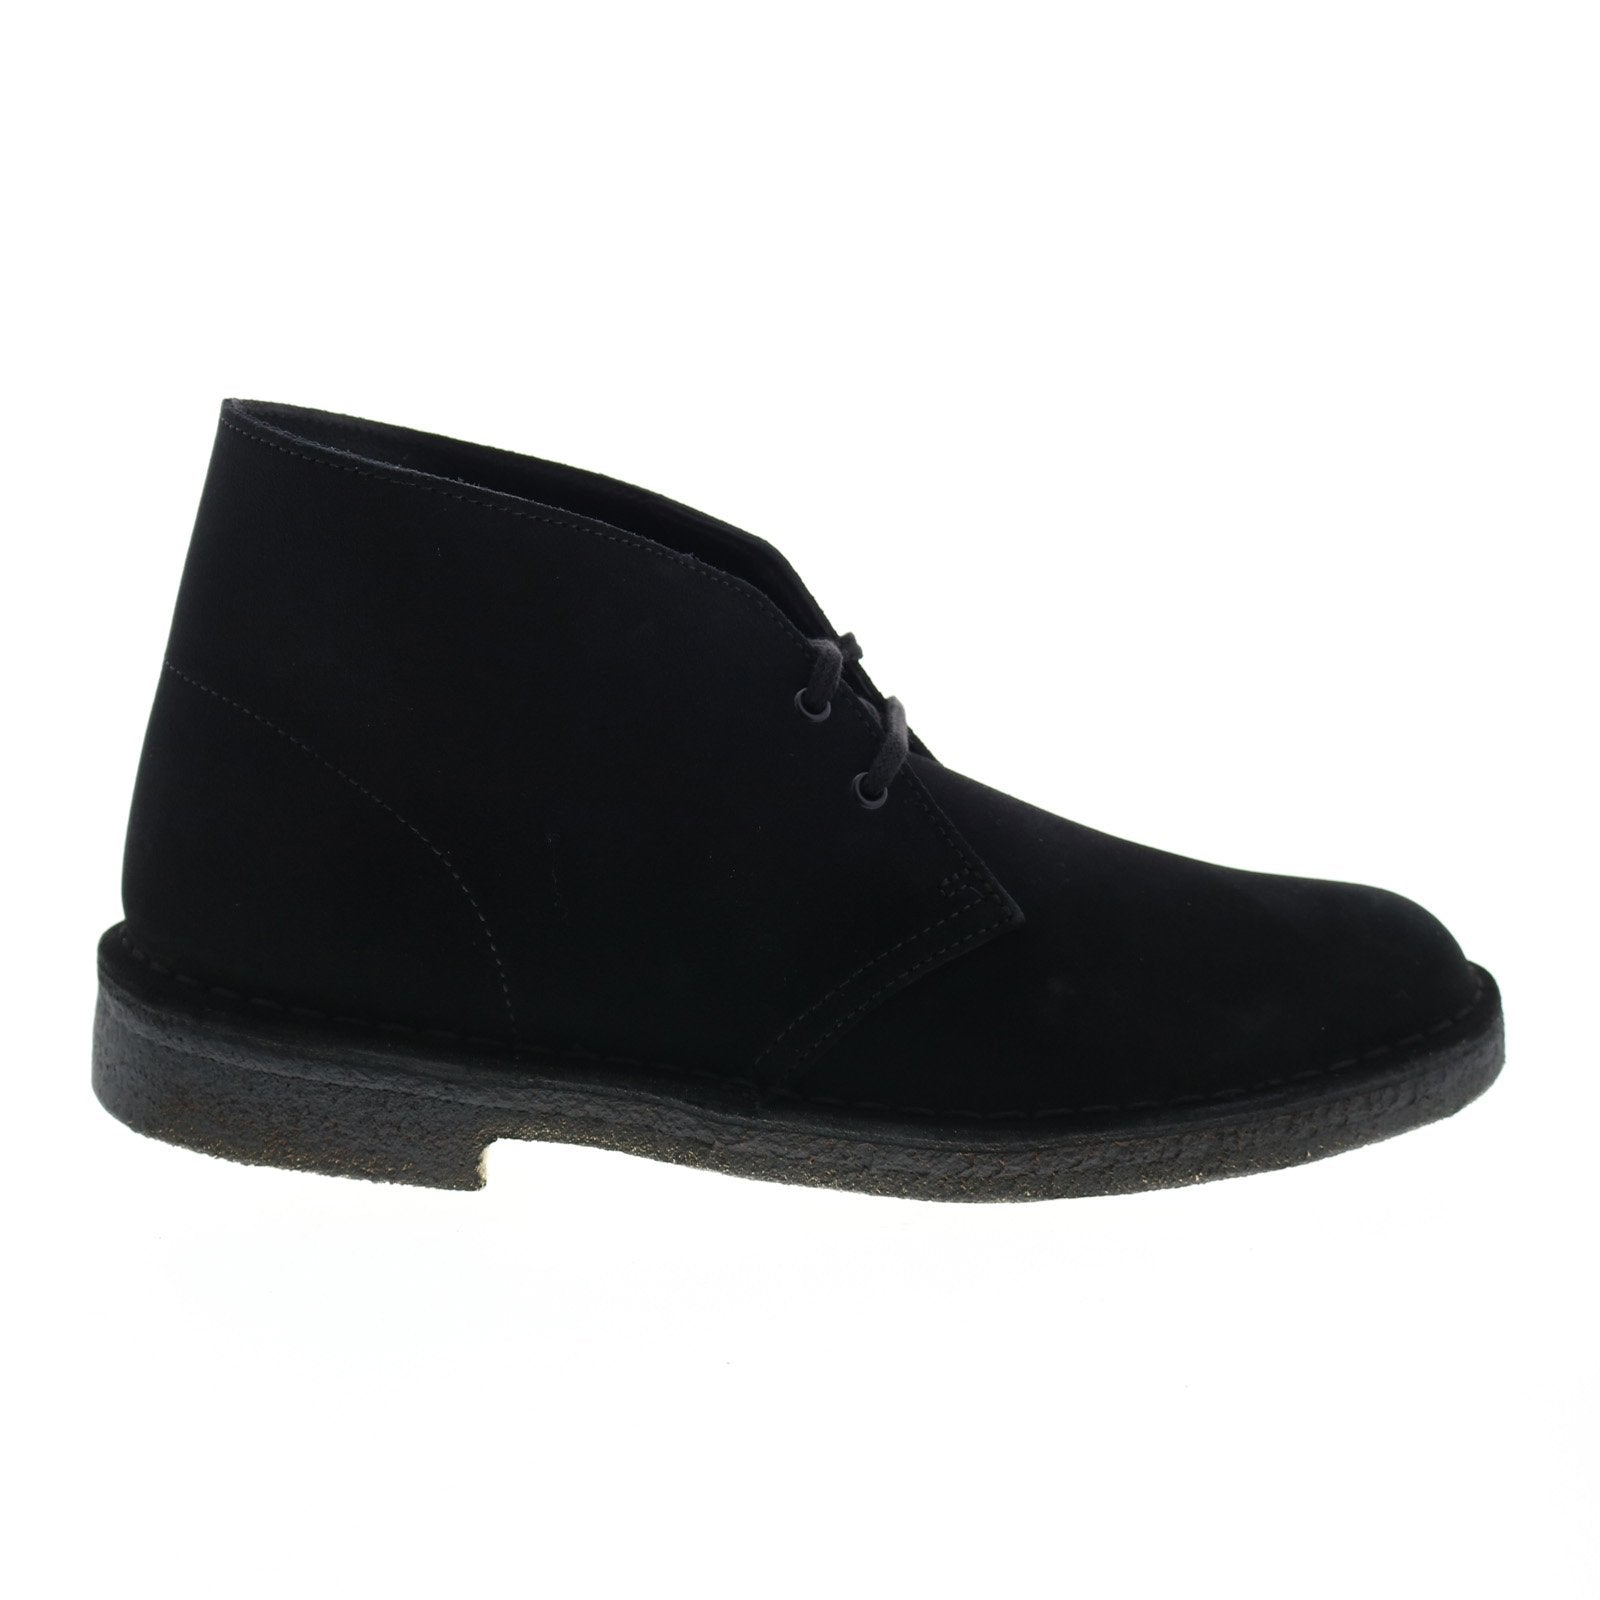 Clarks Desert Boot 26138227 Mens Black Suede Lace Up Chukkas Boots